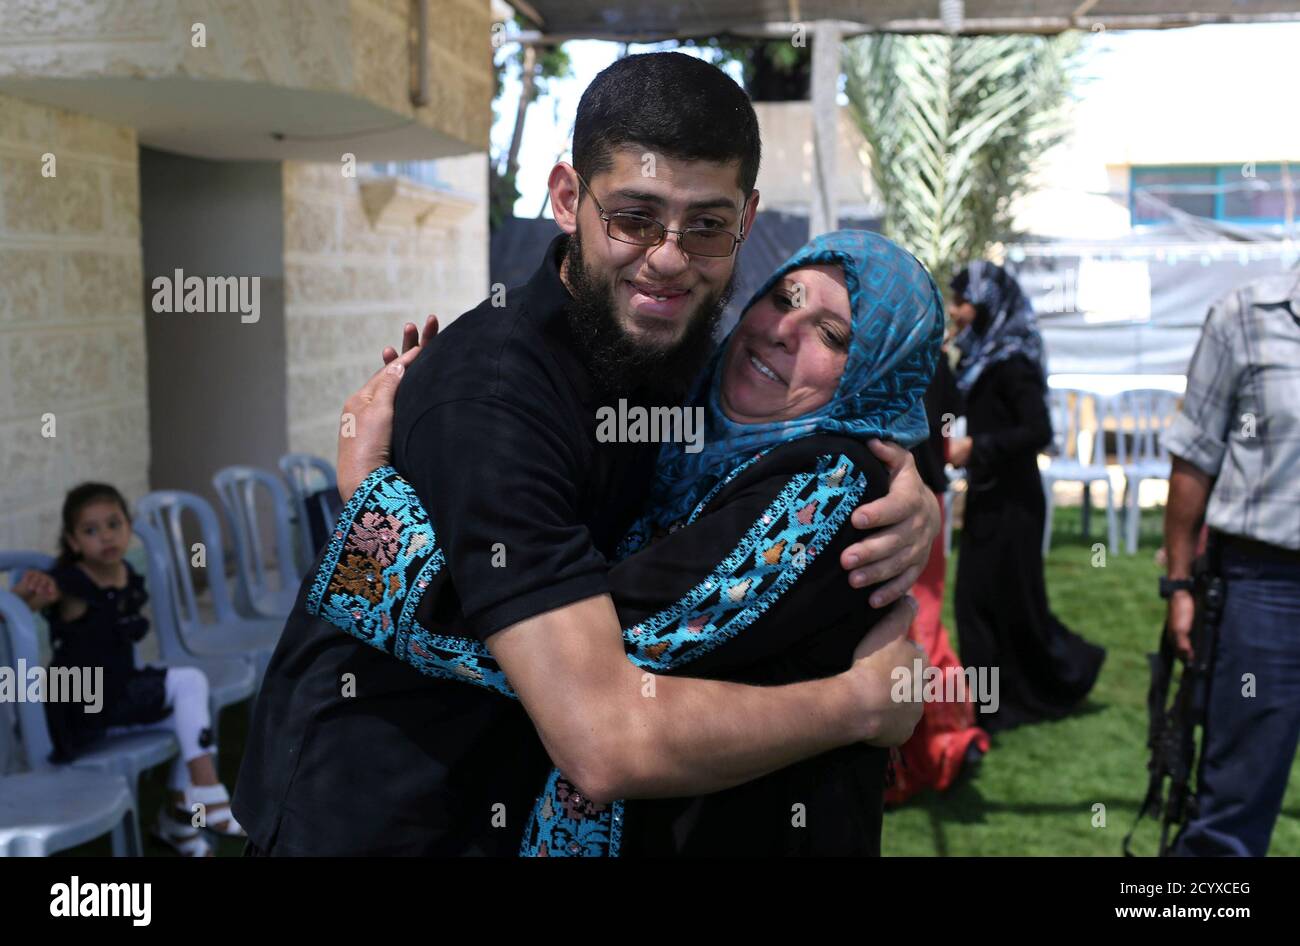 Freed Palestinian prisoner Sayed Harb, 27, hugs his mother upon his release from an Israeli jail, in Khan Younis in the southern Gaza Strip May 26, 2014. According to Harab's family, he served six years in an Israeli jail after being convicted for providing military information on Israeli tanks to the Hamas movement. REUTERS/Ibraheem Abu Mustafa (GAZA - Tags: POLITICS) Stock Photo